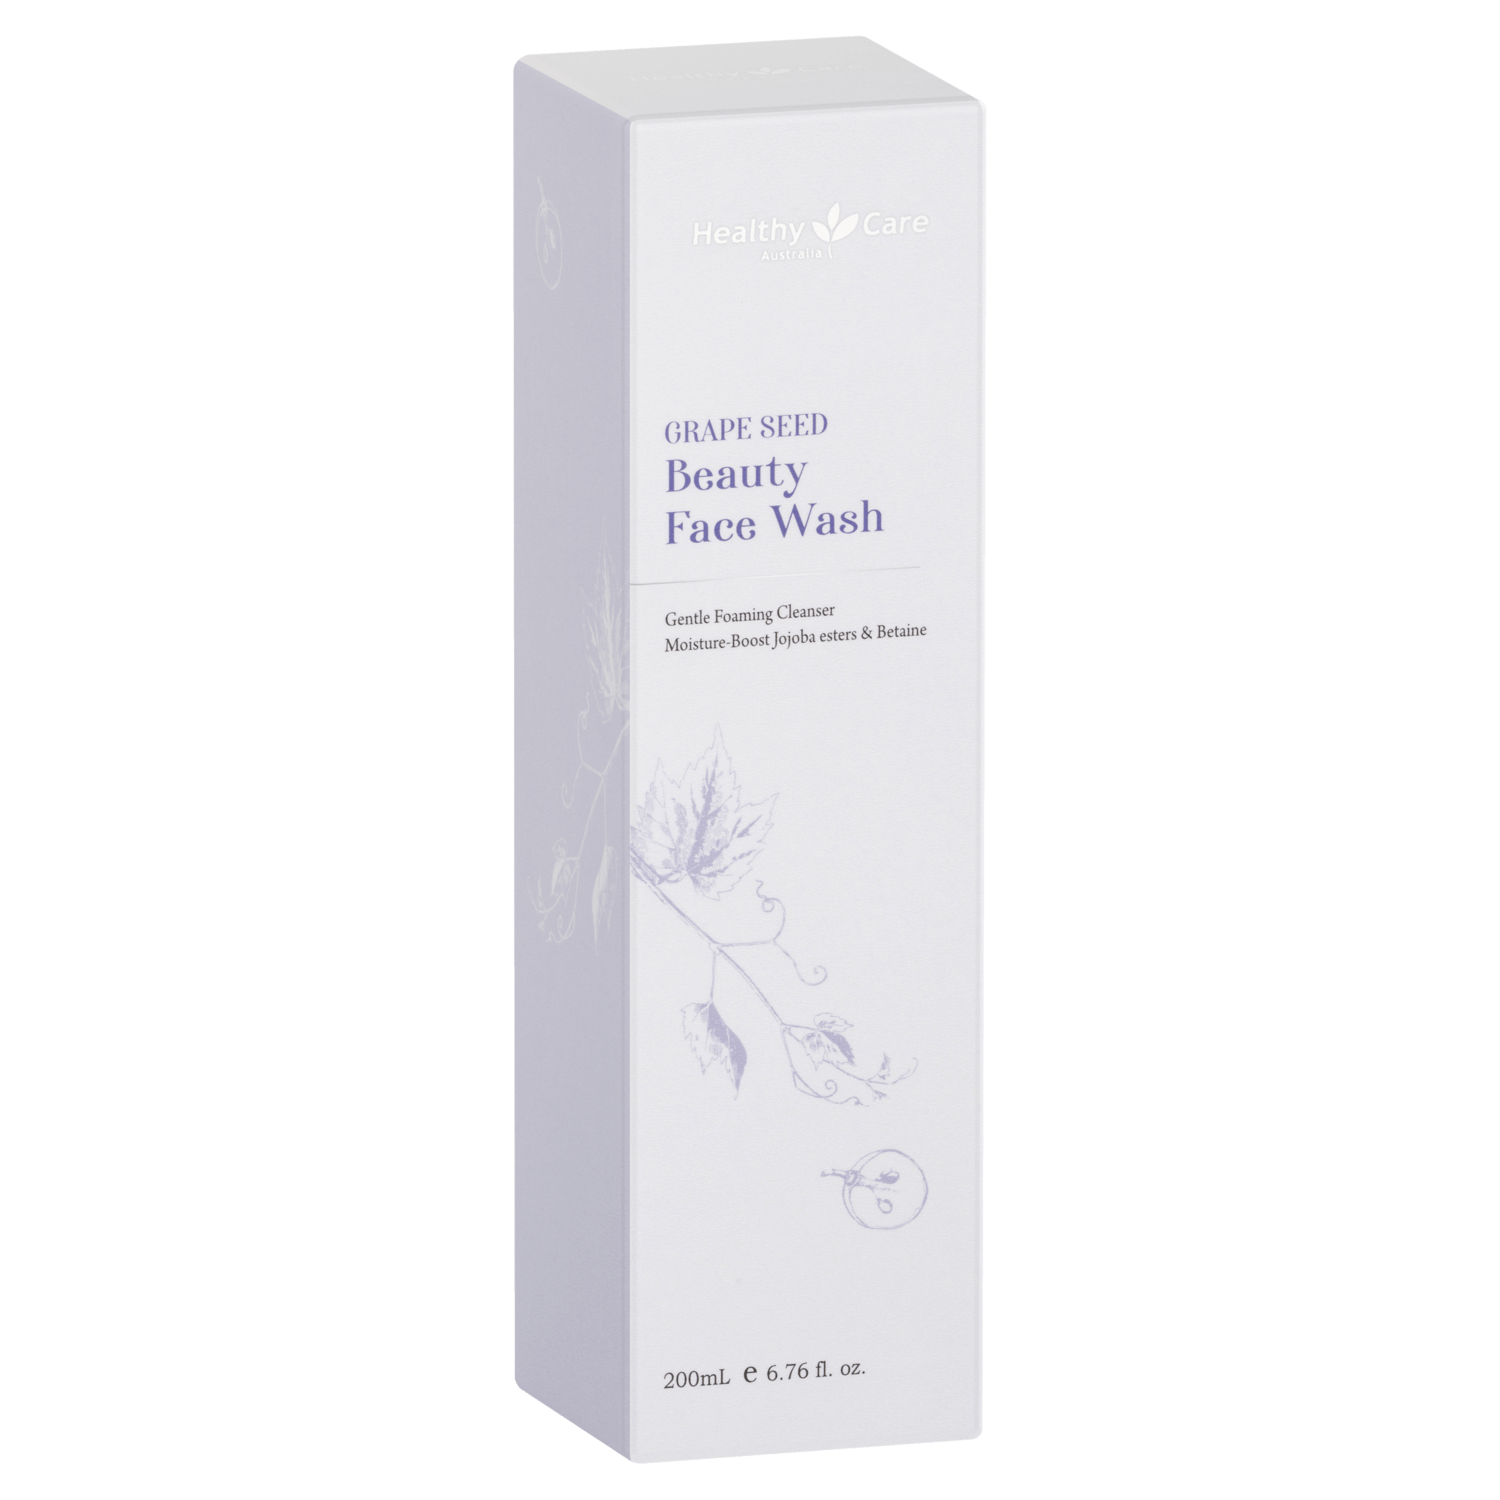 Beauty Face Wash 200mL in box packaging-Facial Cleansers-Healthy Care Australia